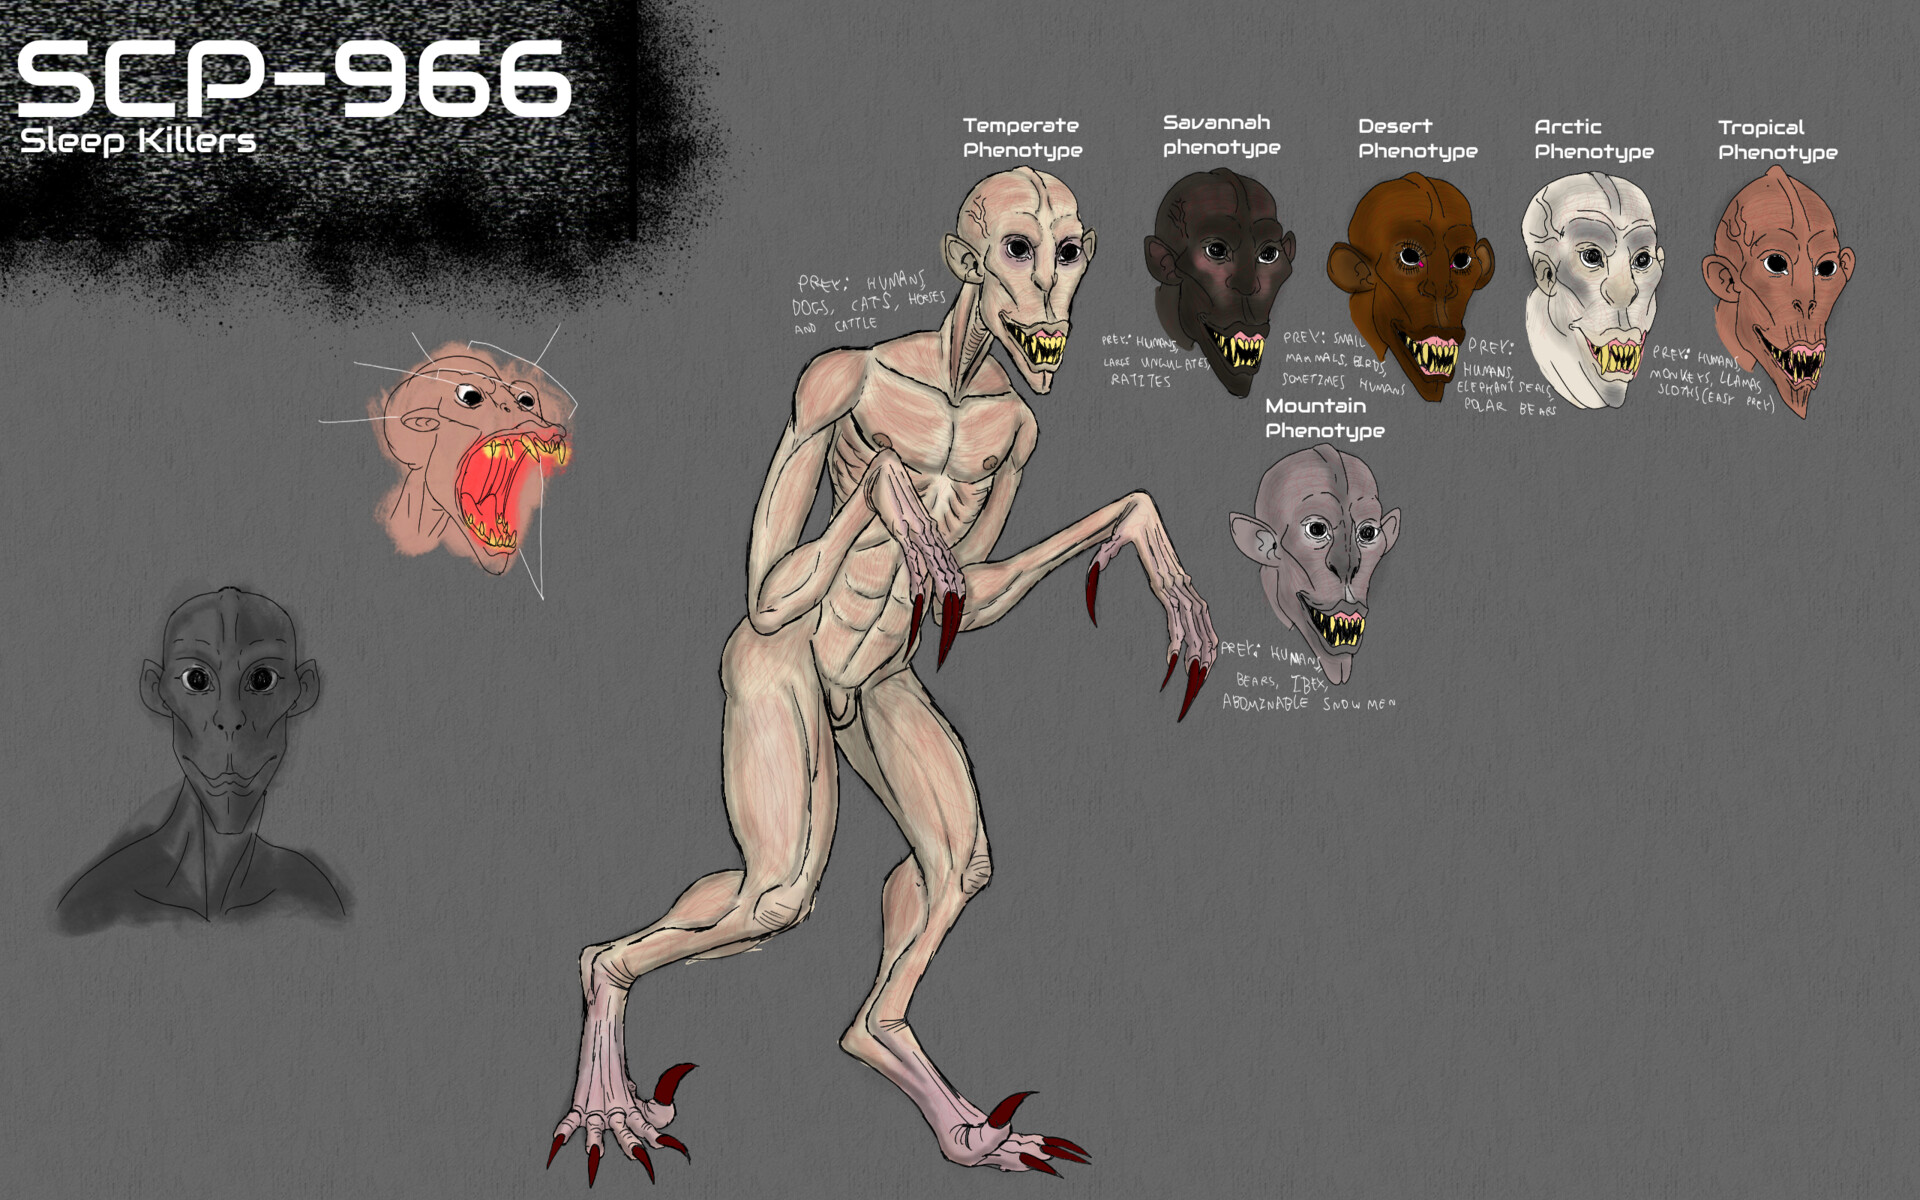 The Death Realm: Could the SCP Foundation contain all monster from